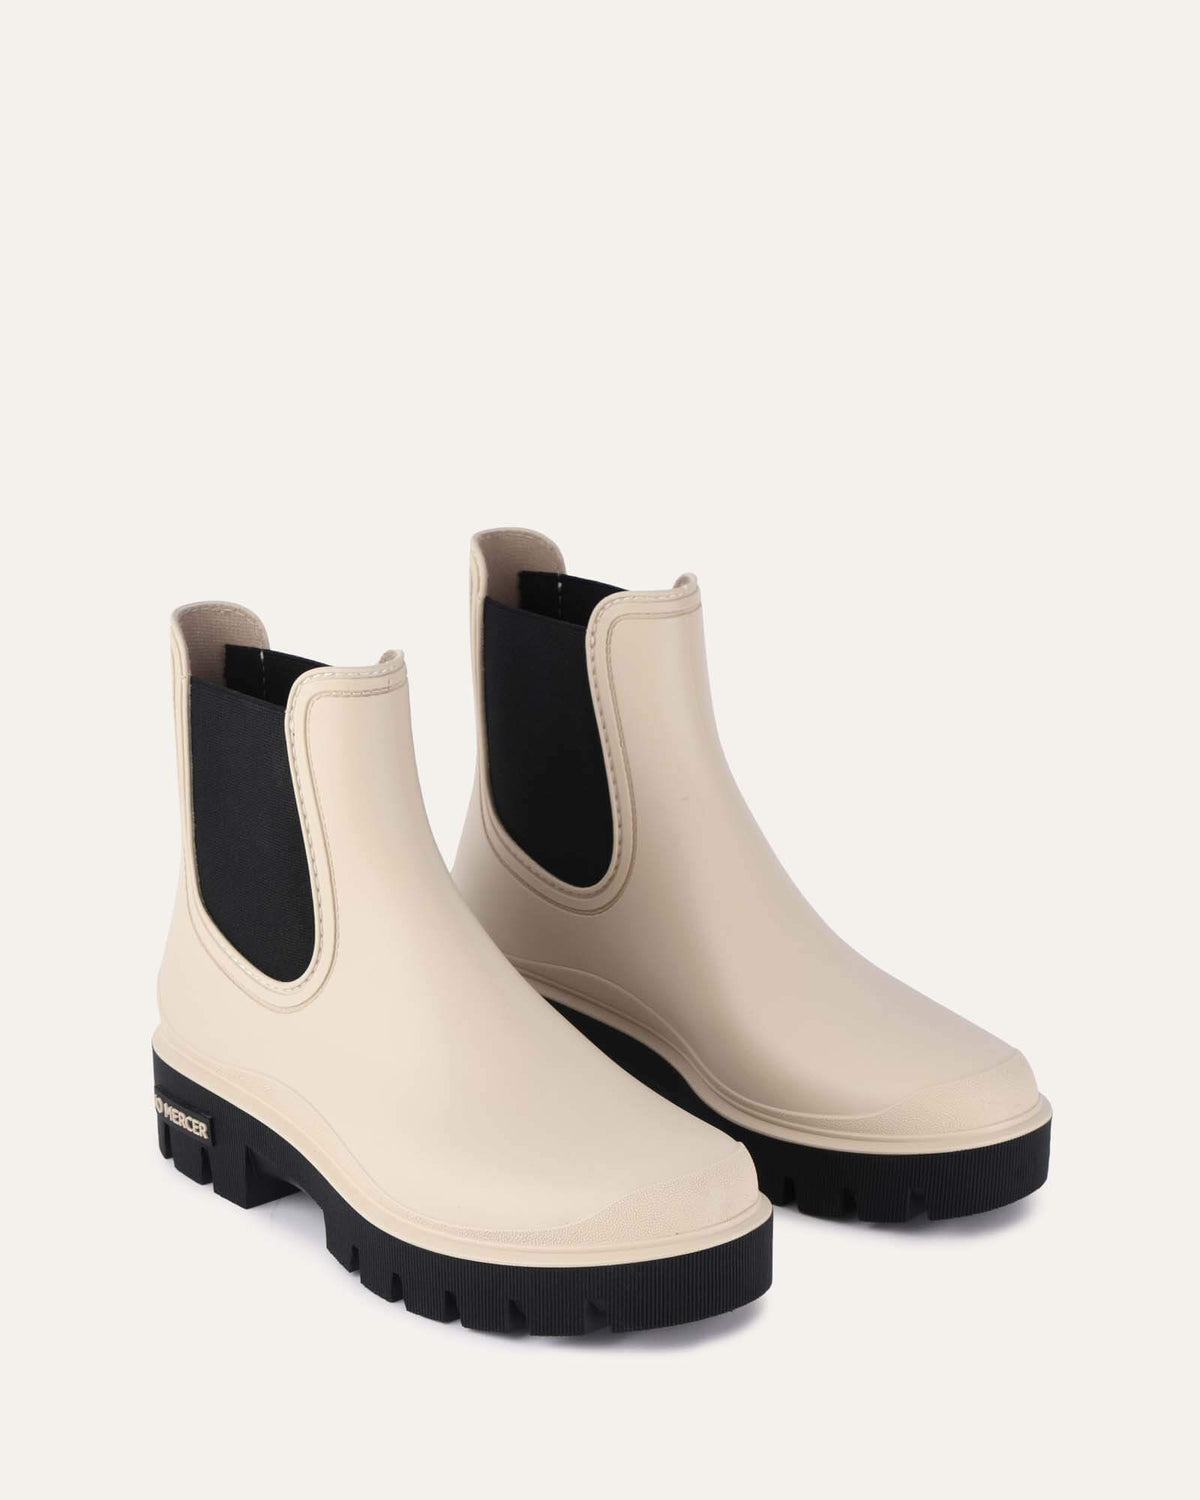 MAEVA FLAT ANKLE BOOTS SAND RUBBER